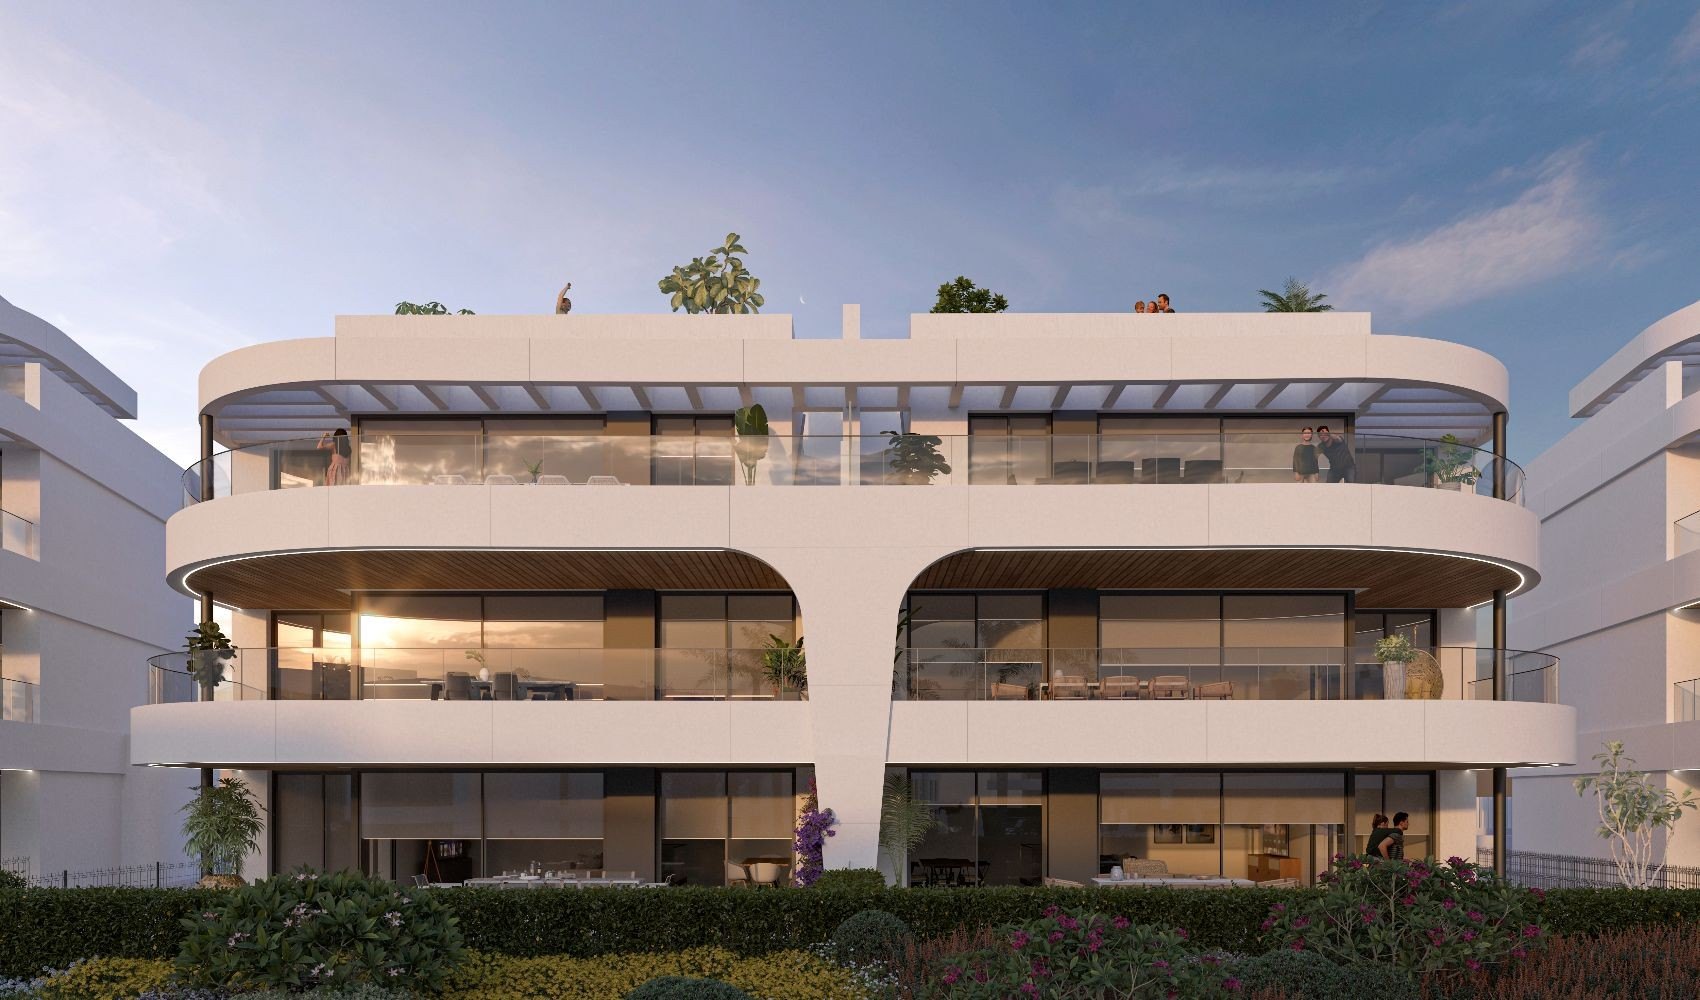 2 BEDROOM PENTHOUSE IN HIGH QUALITY BRAND NEW COMPLEX IN ATALAYA - NEW GOLDEN MILE - ESTEPONA